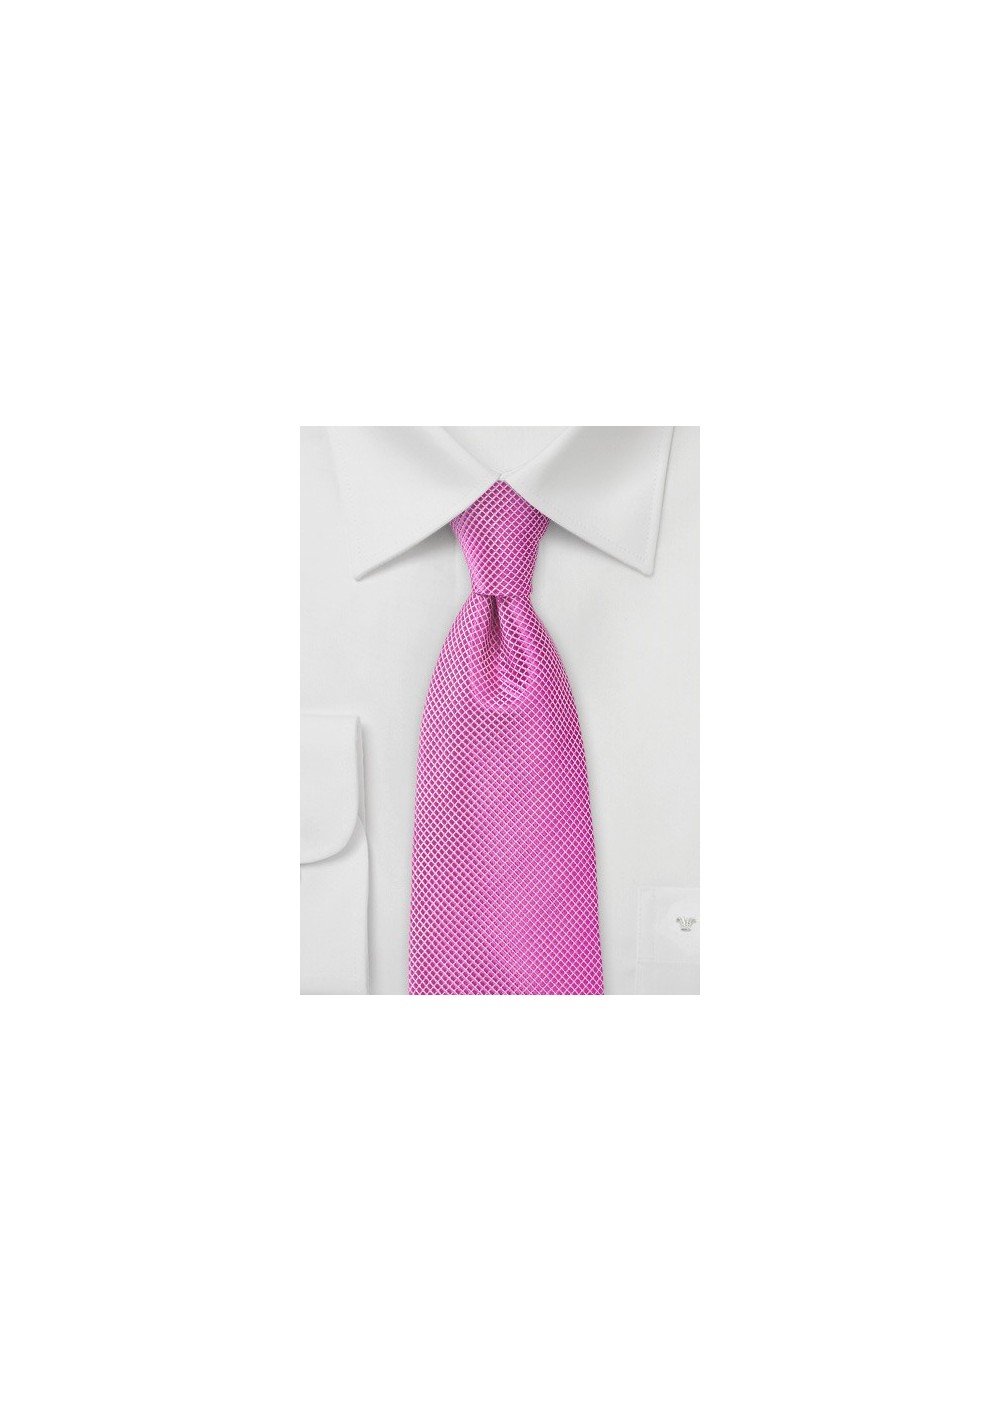 Orchid Pink Kids Sized Tie